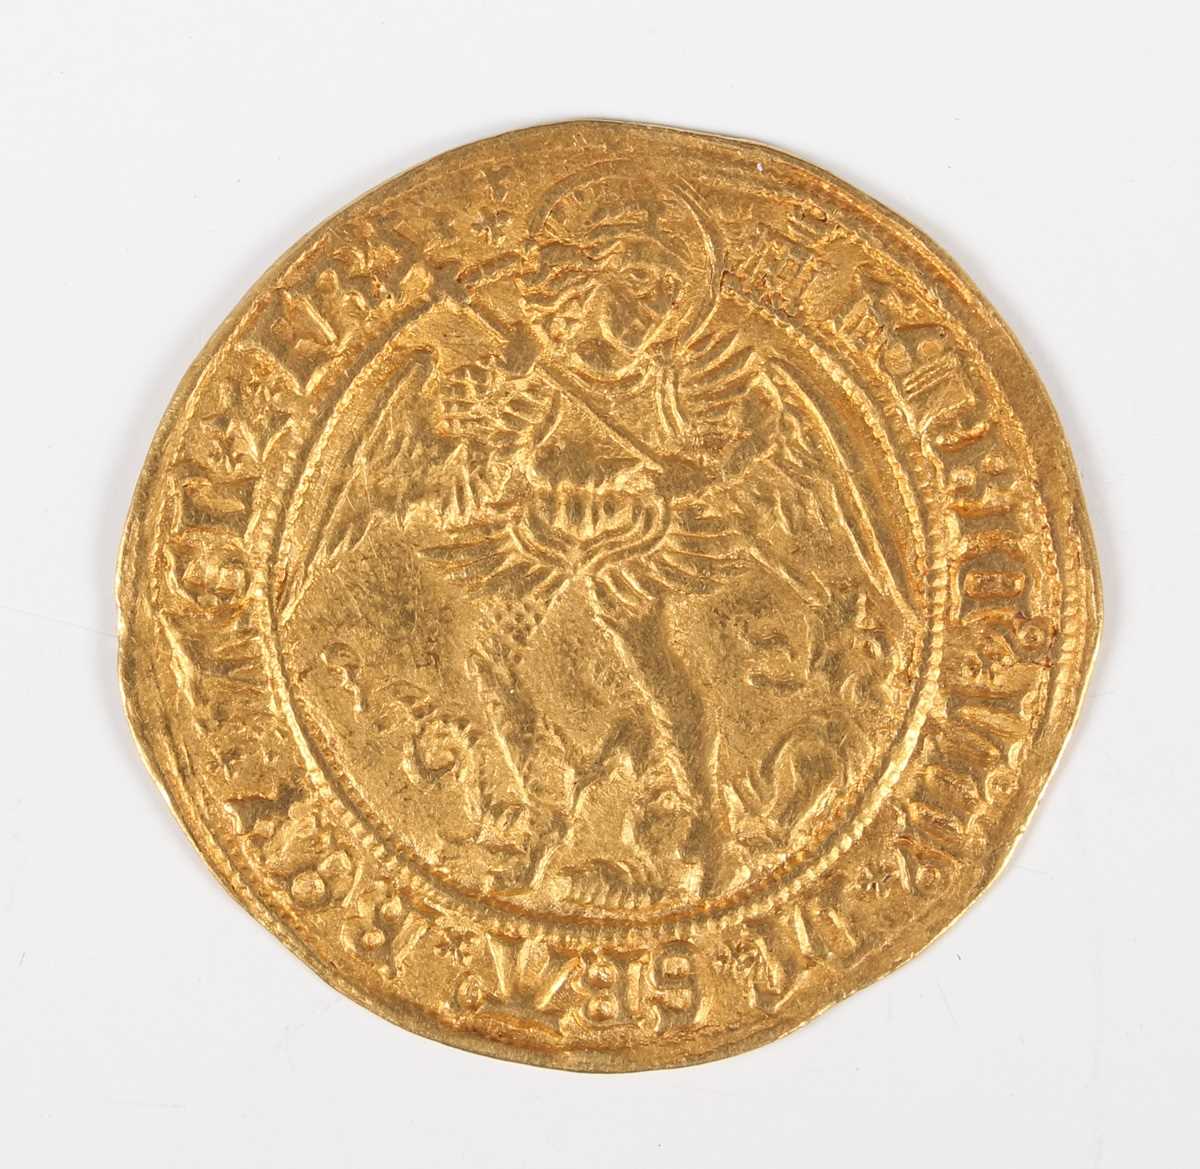 A Henry VIII first coinage gold angel 1509-1526, mintmark castle (well-centred with a nice full